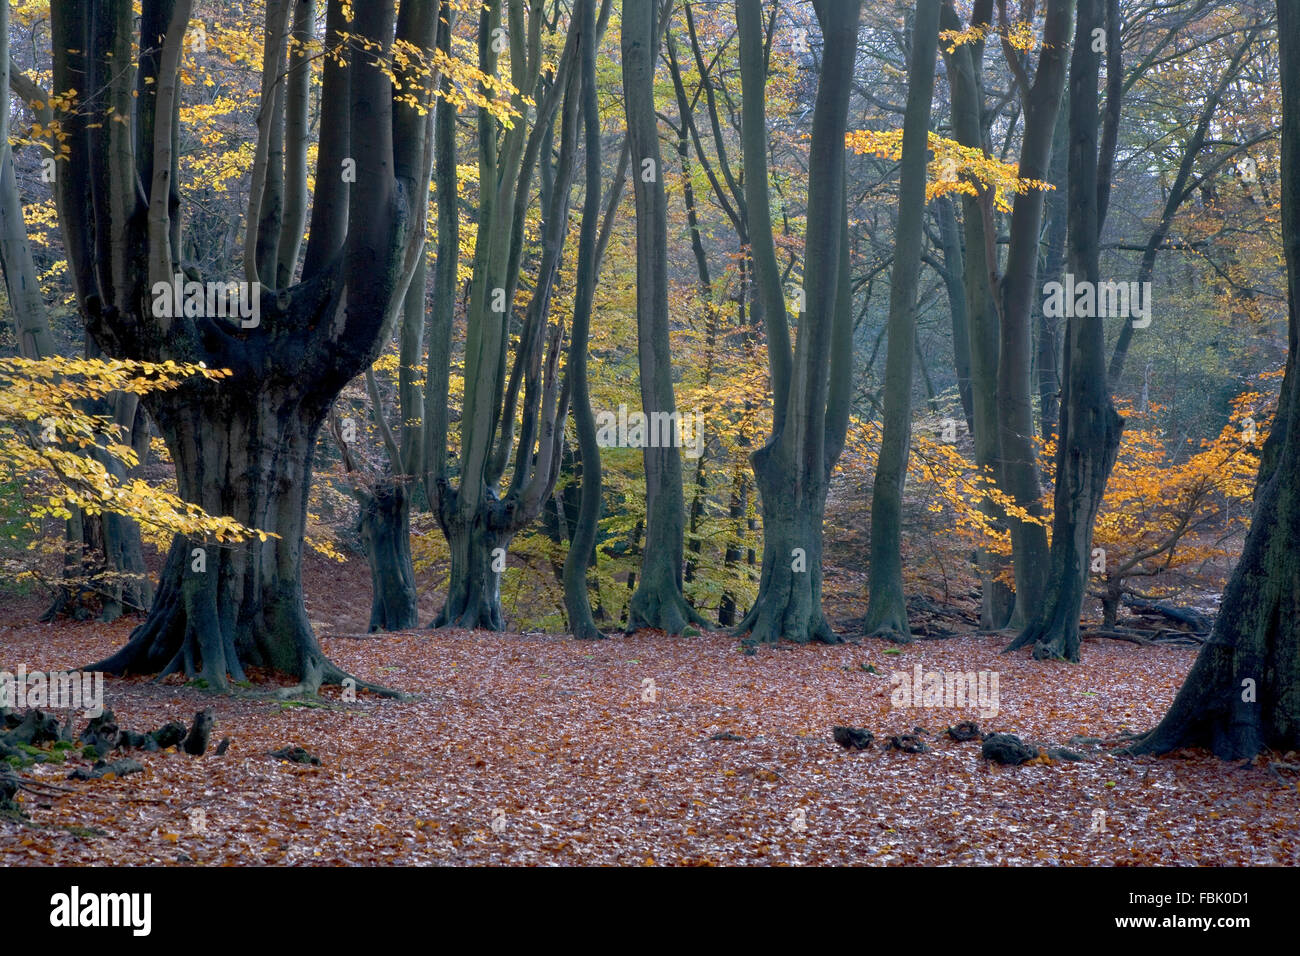 Mature Beech trees (Fagus sylvatica) and other deciduous trees, with autumn colour and woodland floor carpeted with fallen leave Stock Photo